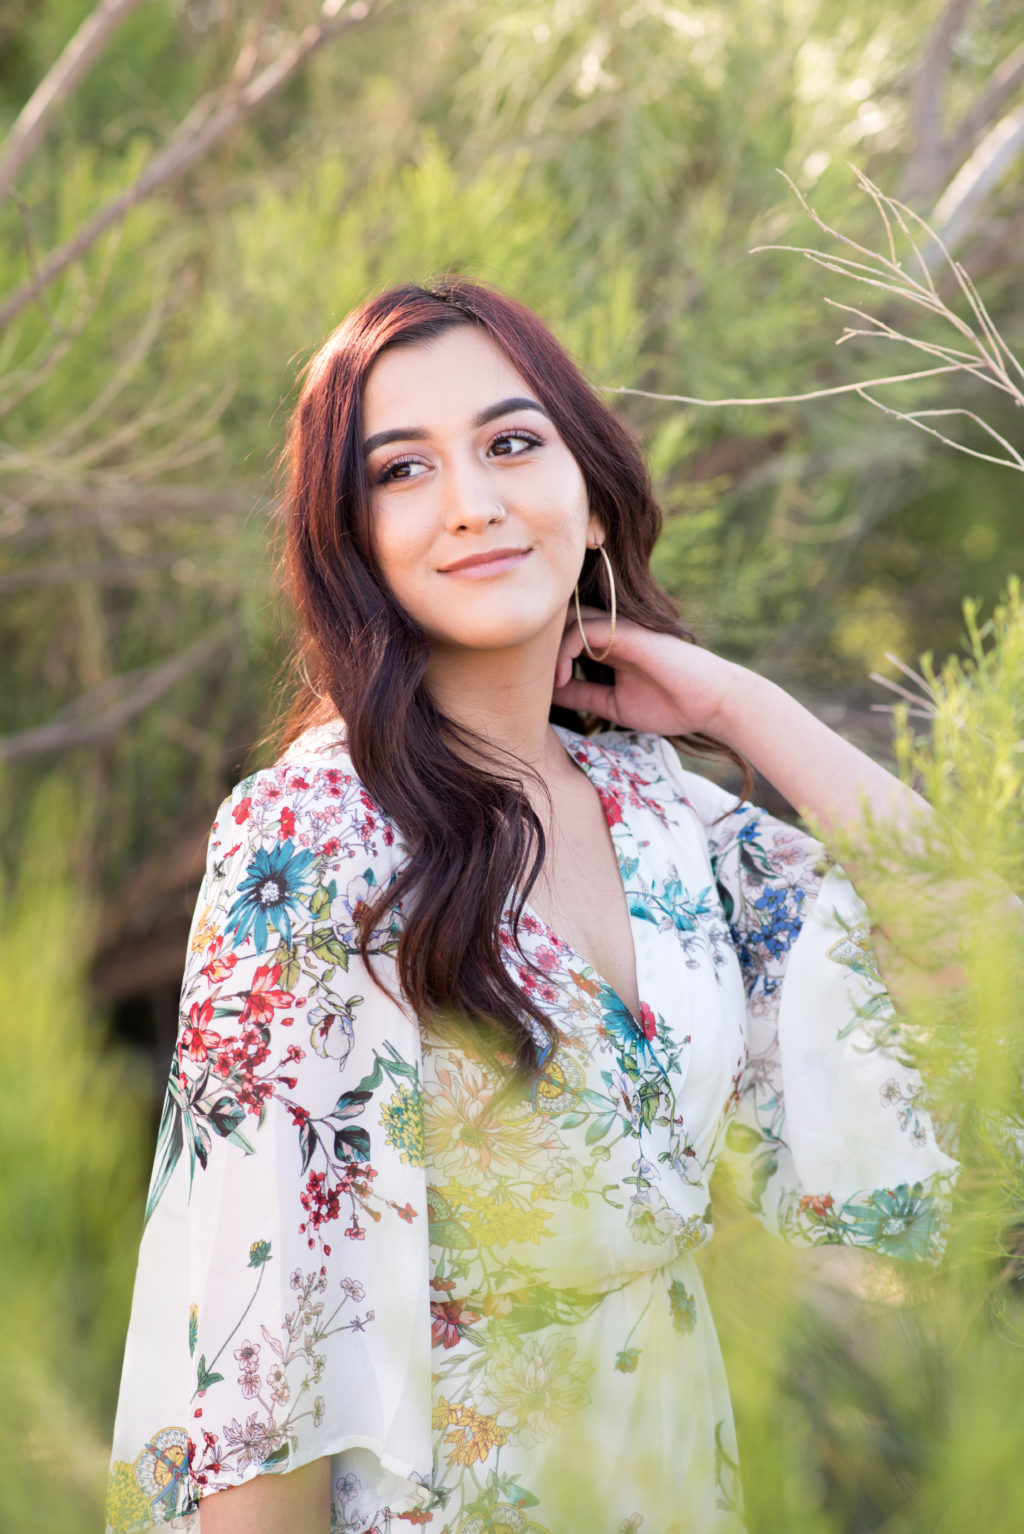 Graduating senior girl photographed at Riparian Preserve in Gilbert, Arizona by photographer Melissa Maxwell of Jubilee Family Photography.